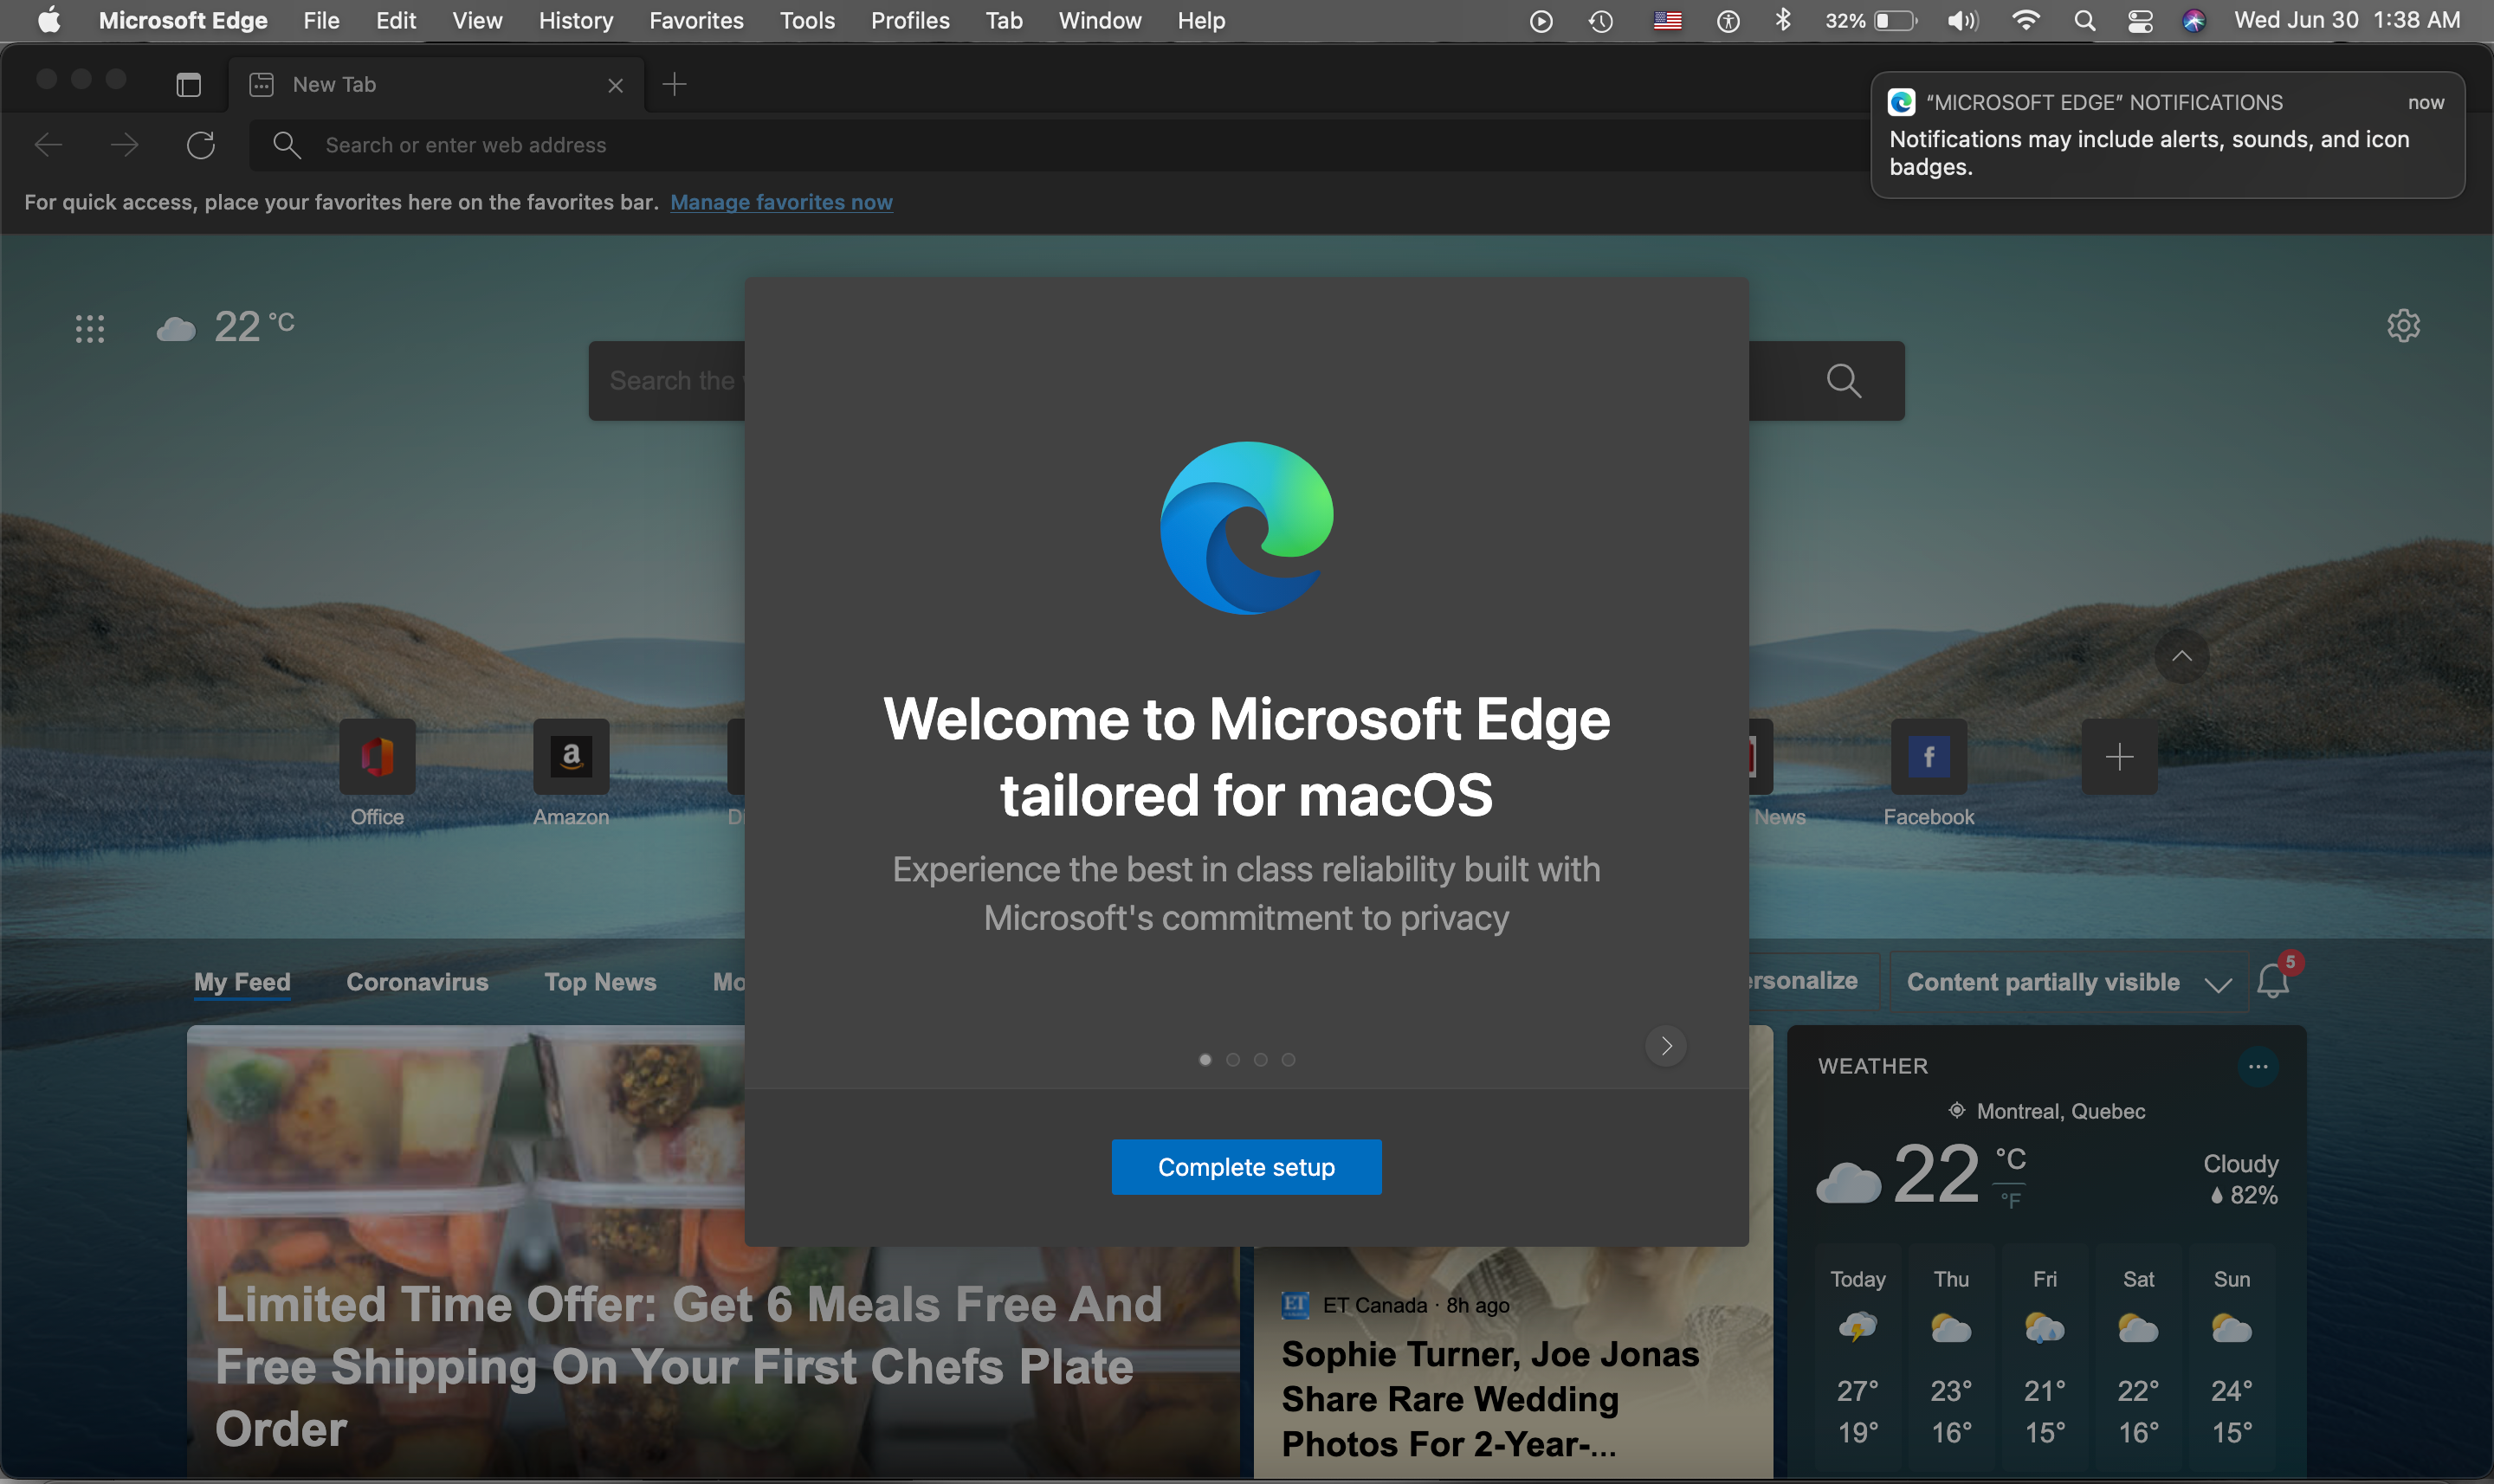 The first glimpse of Microsoft Edge when first opened on a MacBook Pro